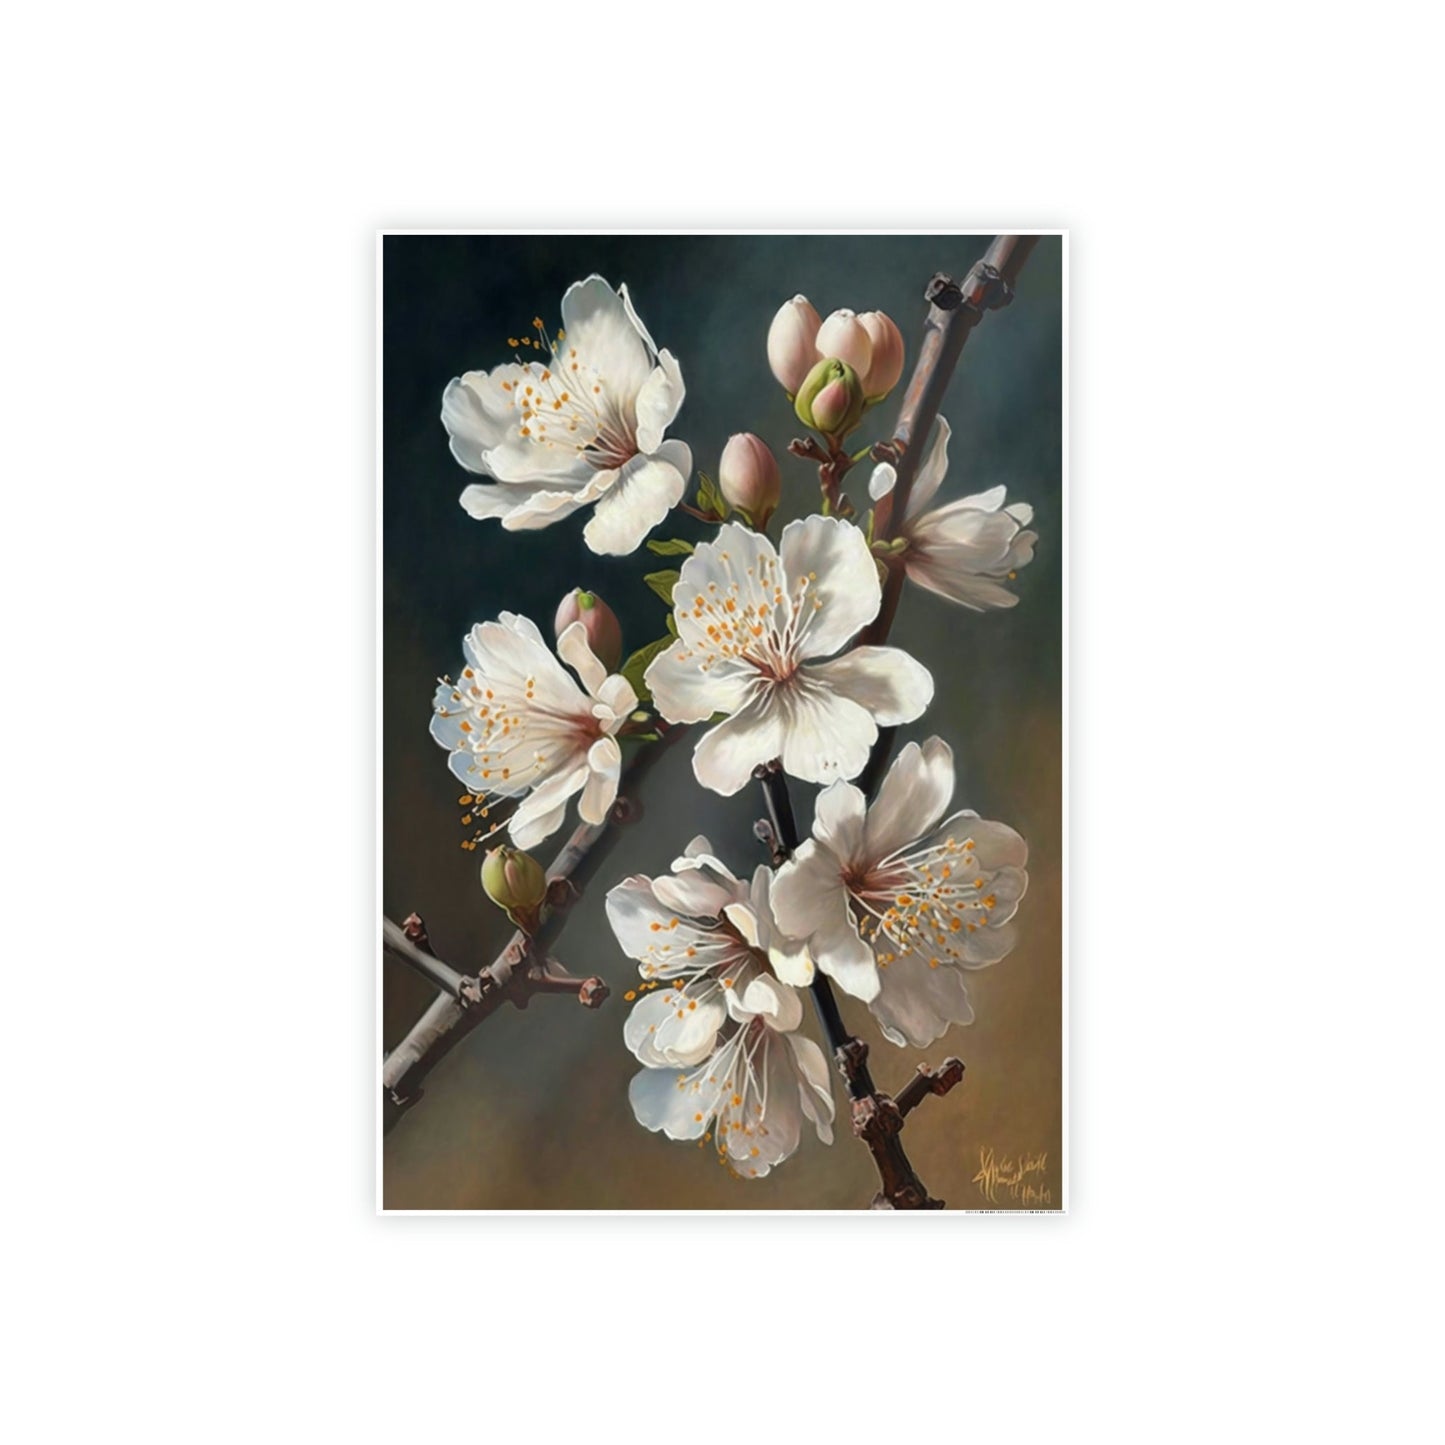 The Promise of Spring: Poster & Canvas Print of Blooming Almond Trees